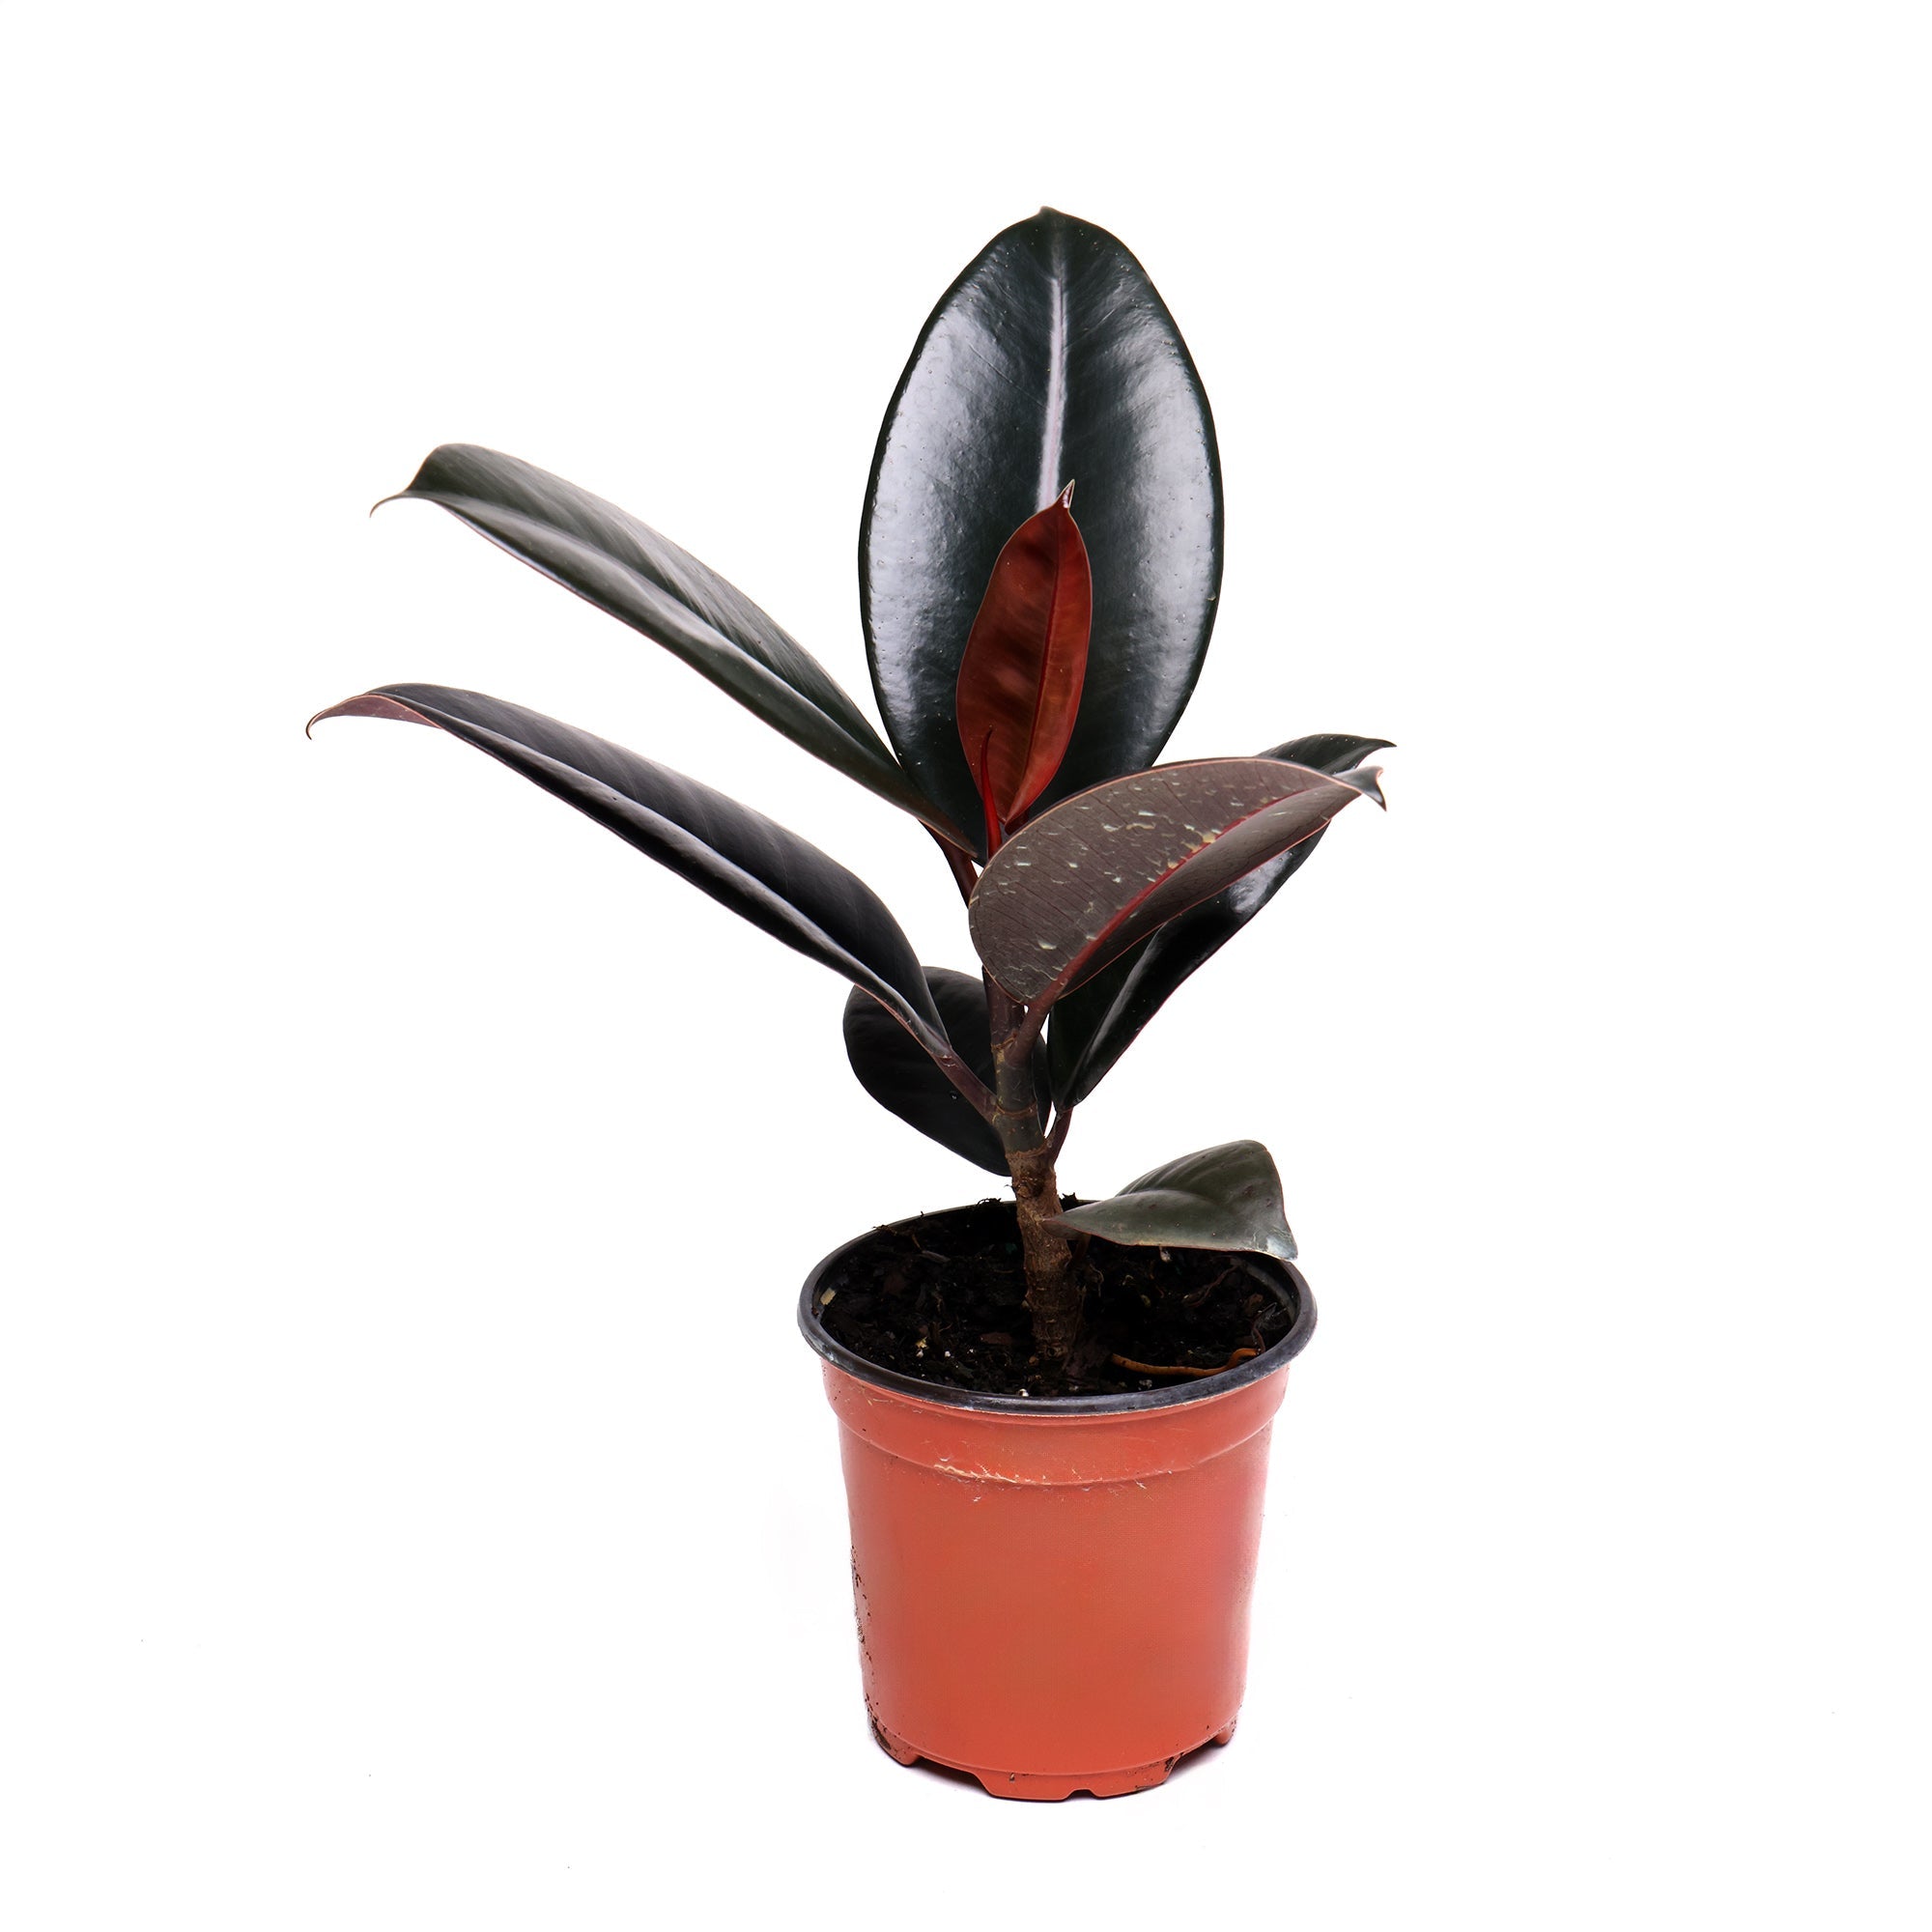 A small Chive Studio 2024 Ficus Elastica Burgundy 4 Inch Pot in a simple terracotta-colored plastic pot. This indoor plant features several dark green, shiny leaves with a hint of burgundy on some undersides, standing upright on a single stem. Known for its air-purifying qualities, it is set against a plain white background.